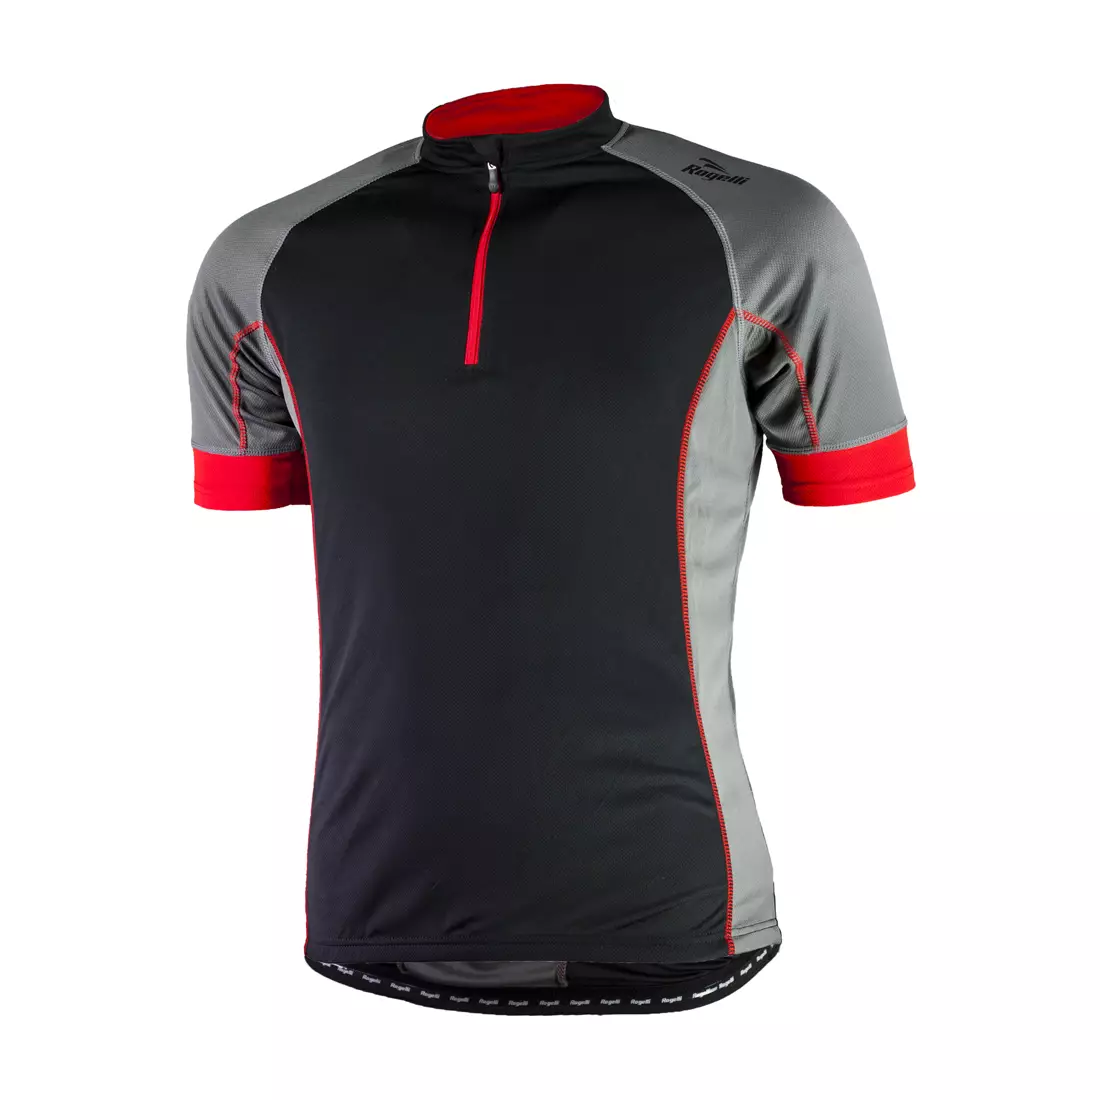 ROGELLI MANTUA - men's cycling jersey 001.062, black and red